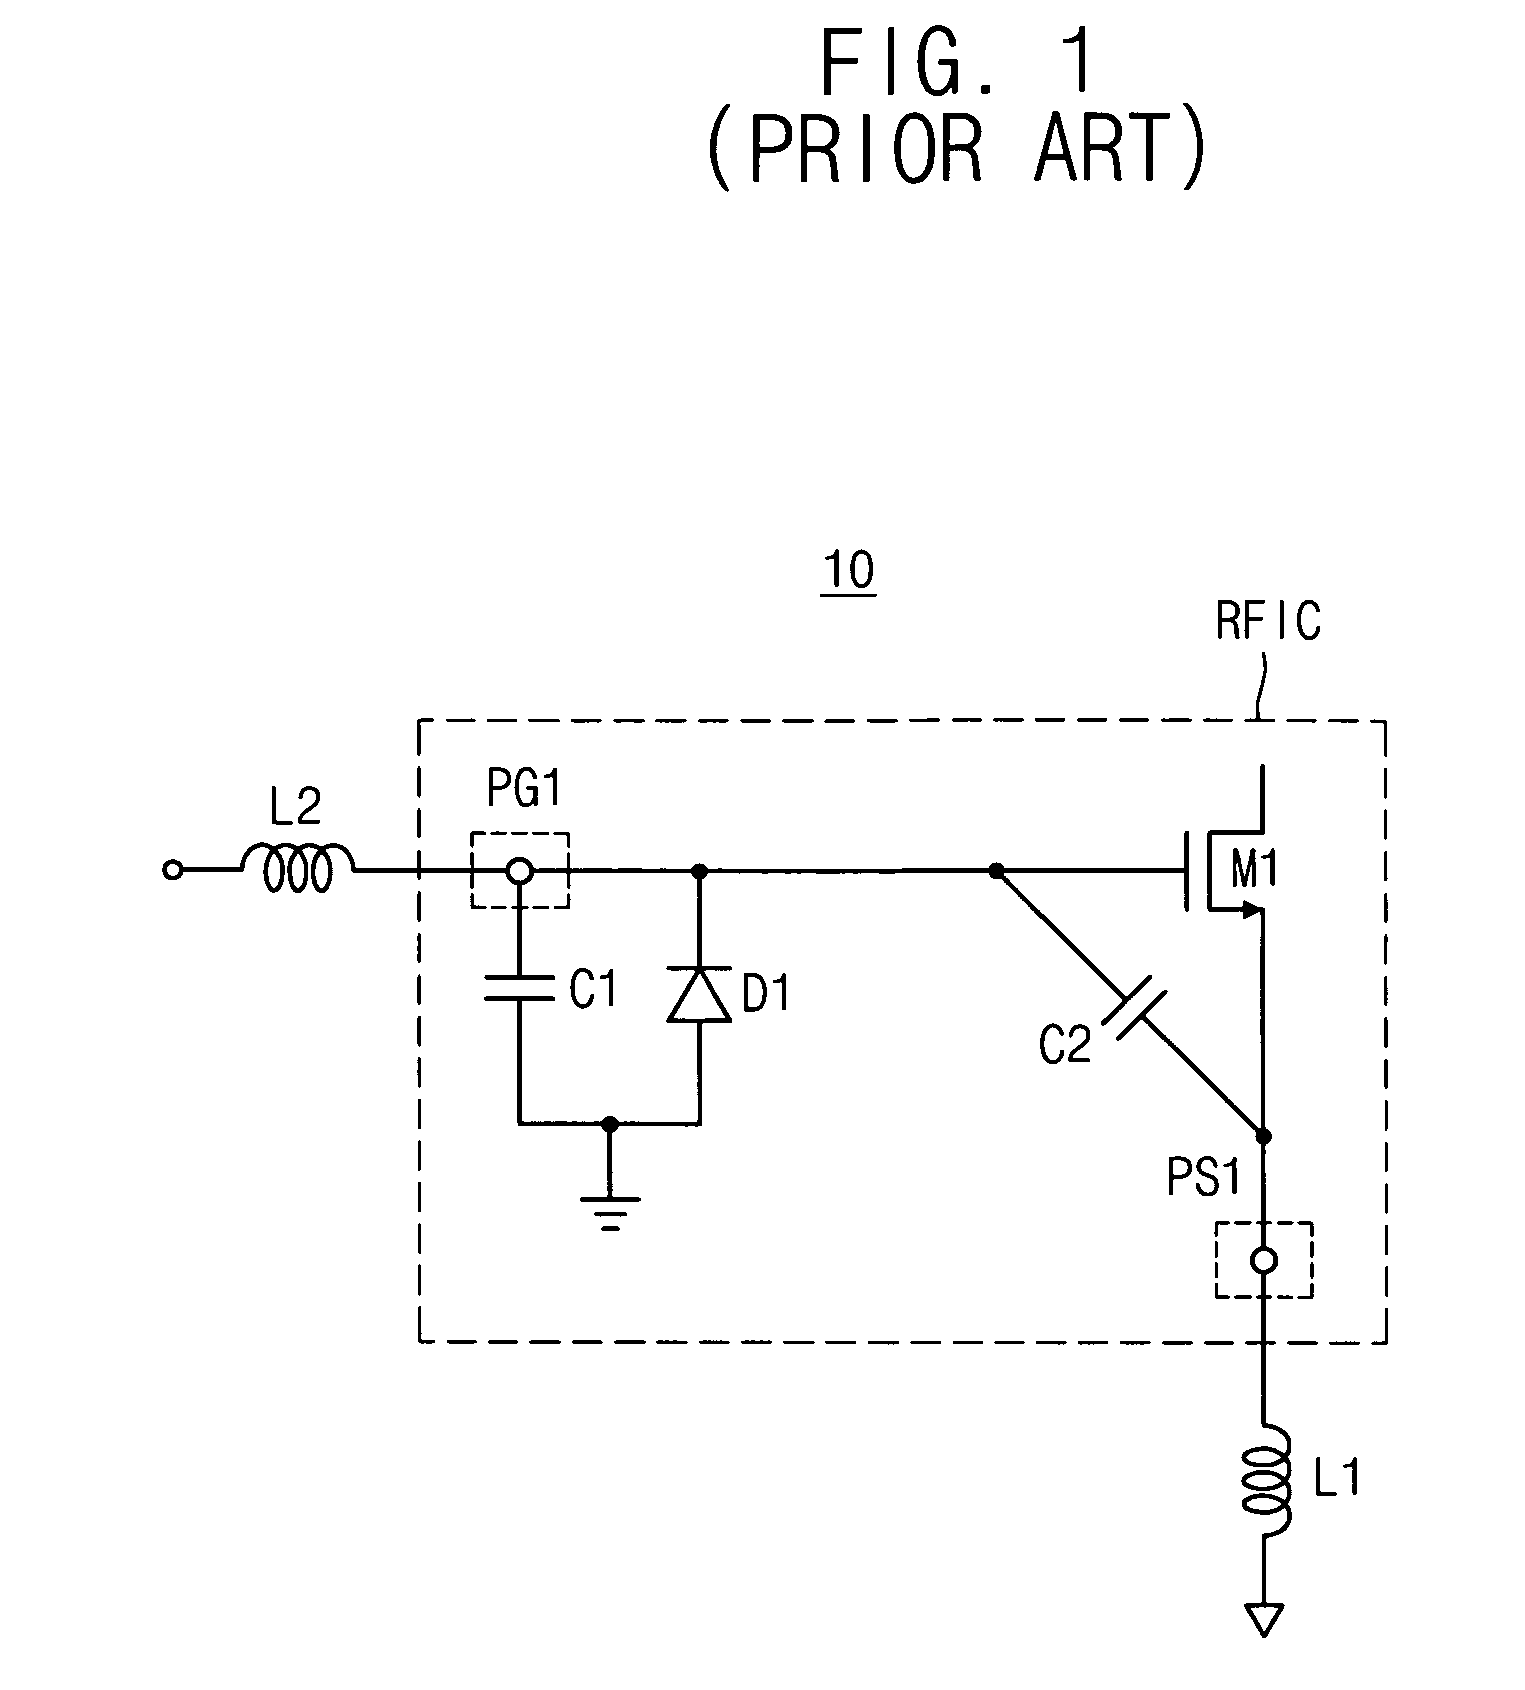 Input impedance matching circuit for low noise amplifier